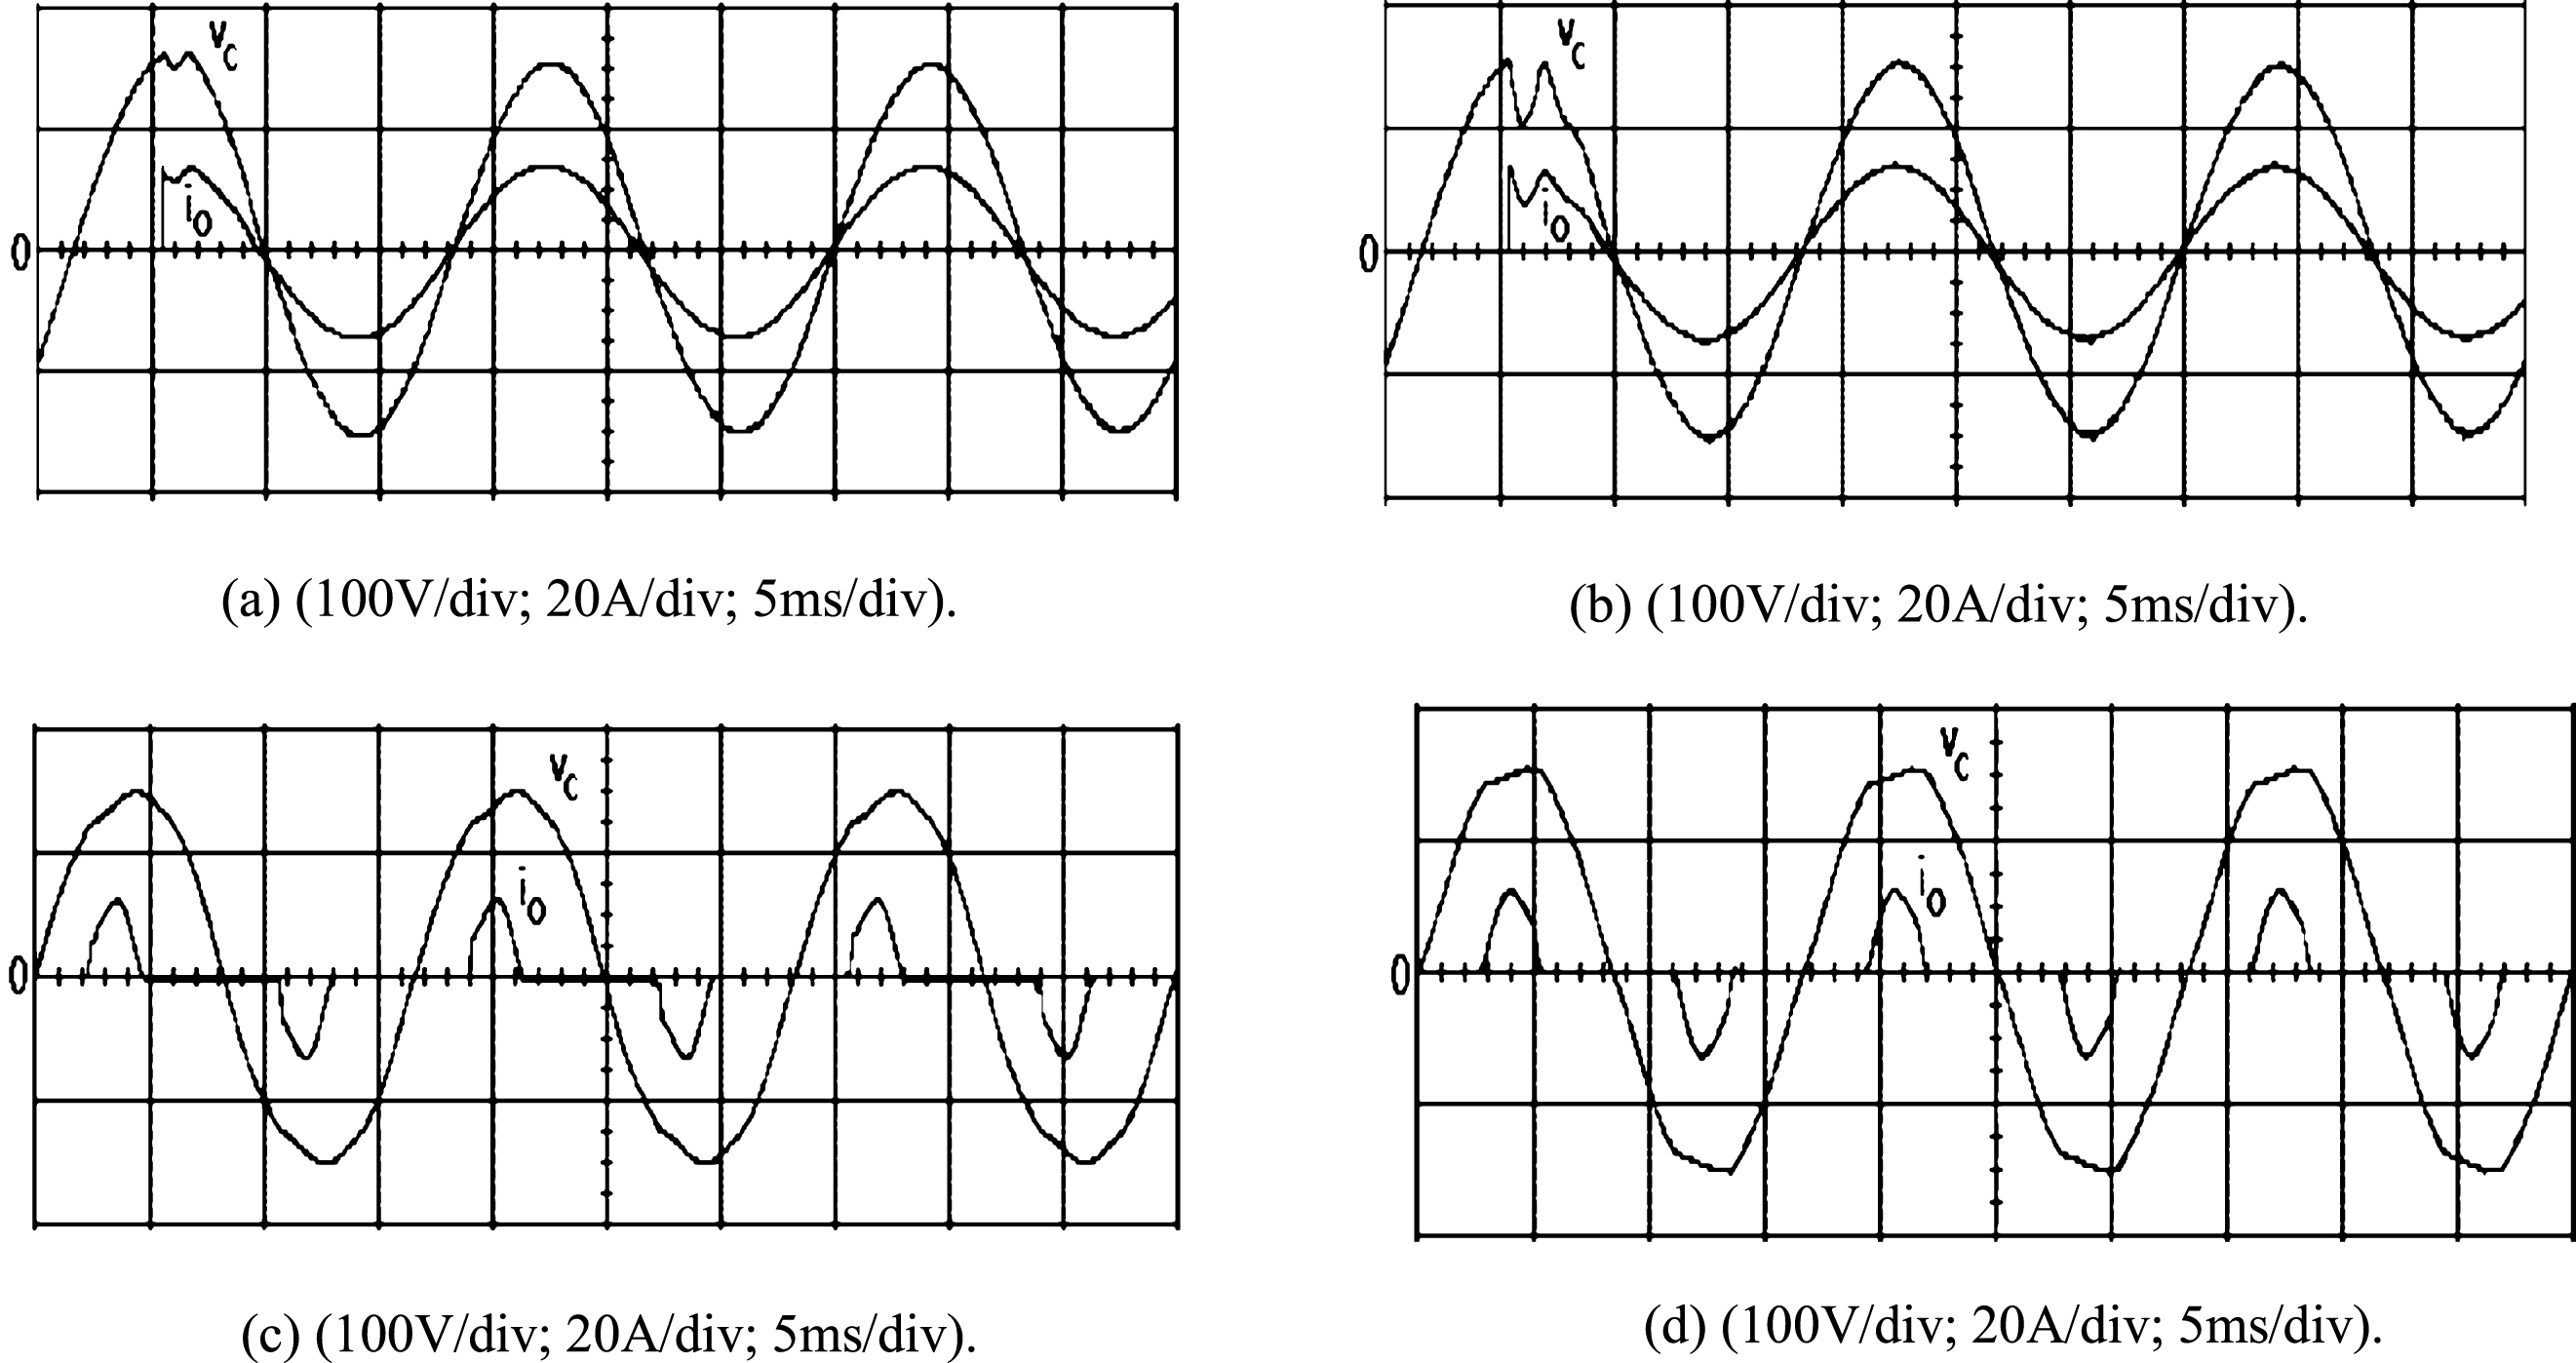 Experimental waveforms under (a) step change in load with the proposed controller; (b) step change in load with classic VSC; (c) rectifier load with proposed controller; (d) rectifier load with classic VSC.